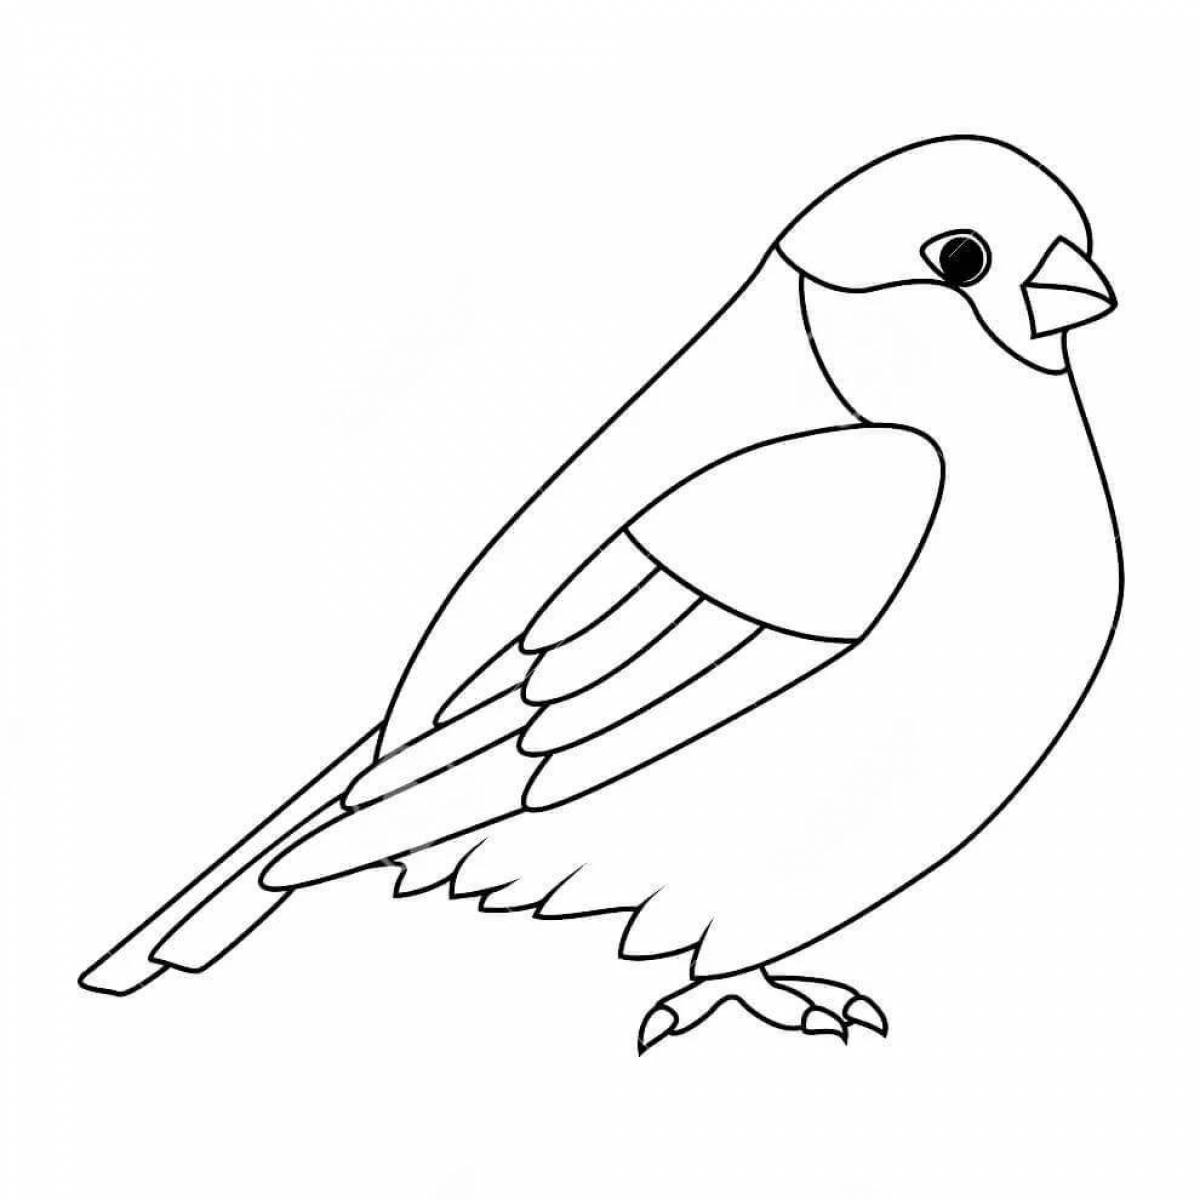 Spicy drawing of a bullfinch